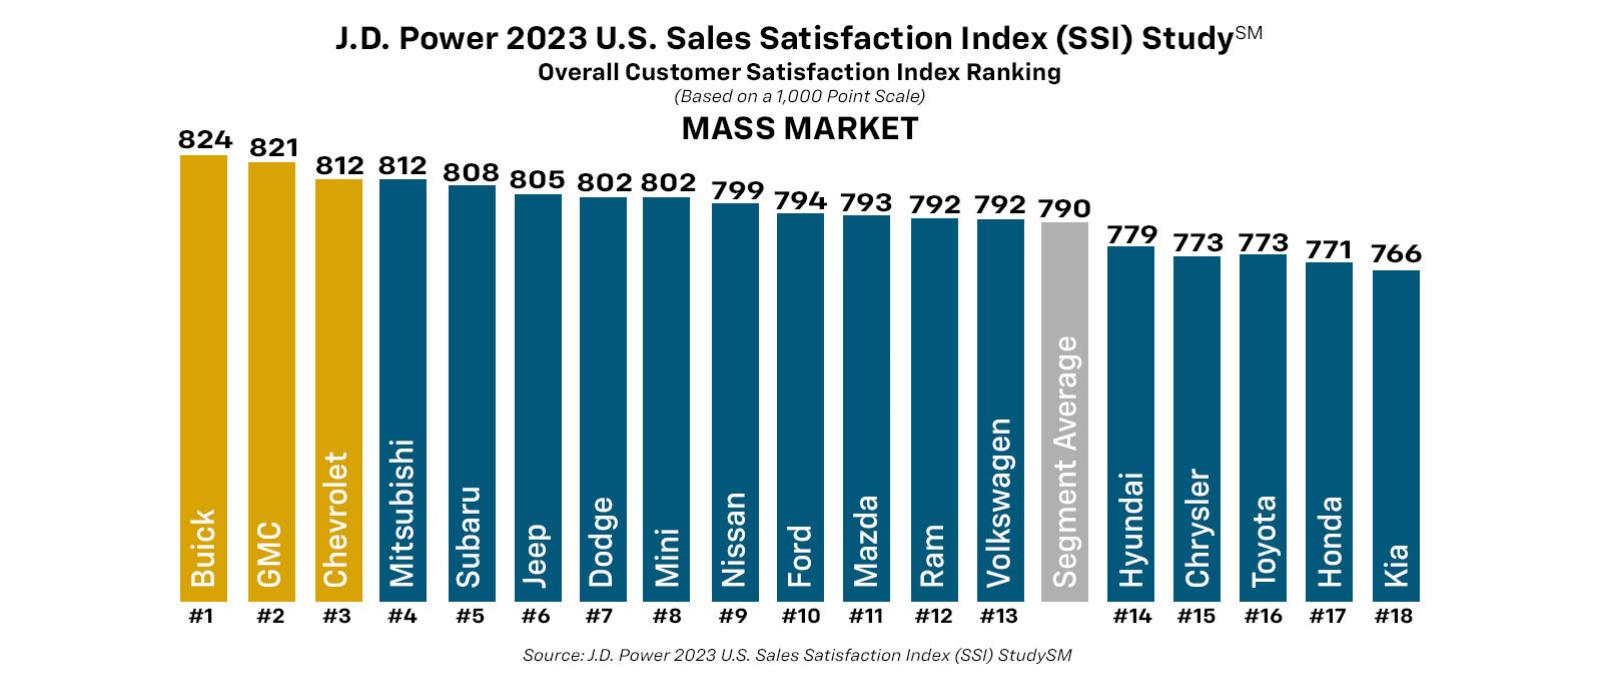 Buick GMC amd Chevrolet are ranked the Top 3 Overall Customer Satisfaction Index Ranking